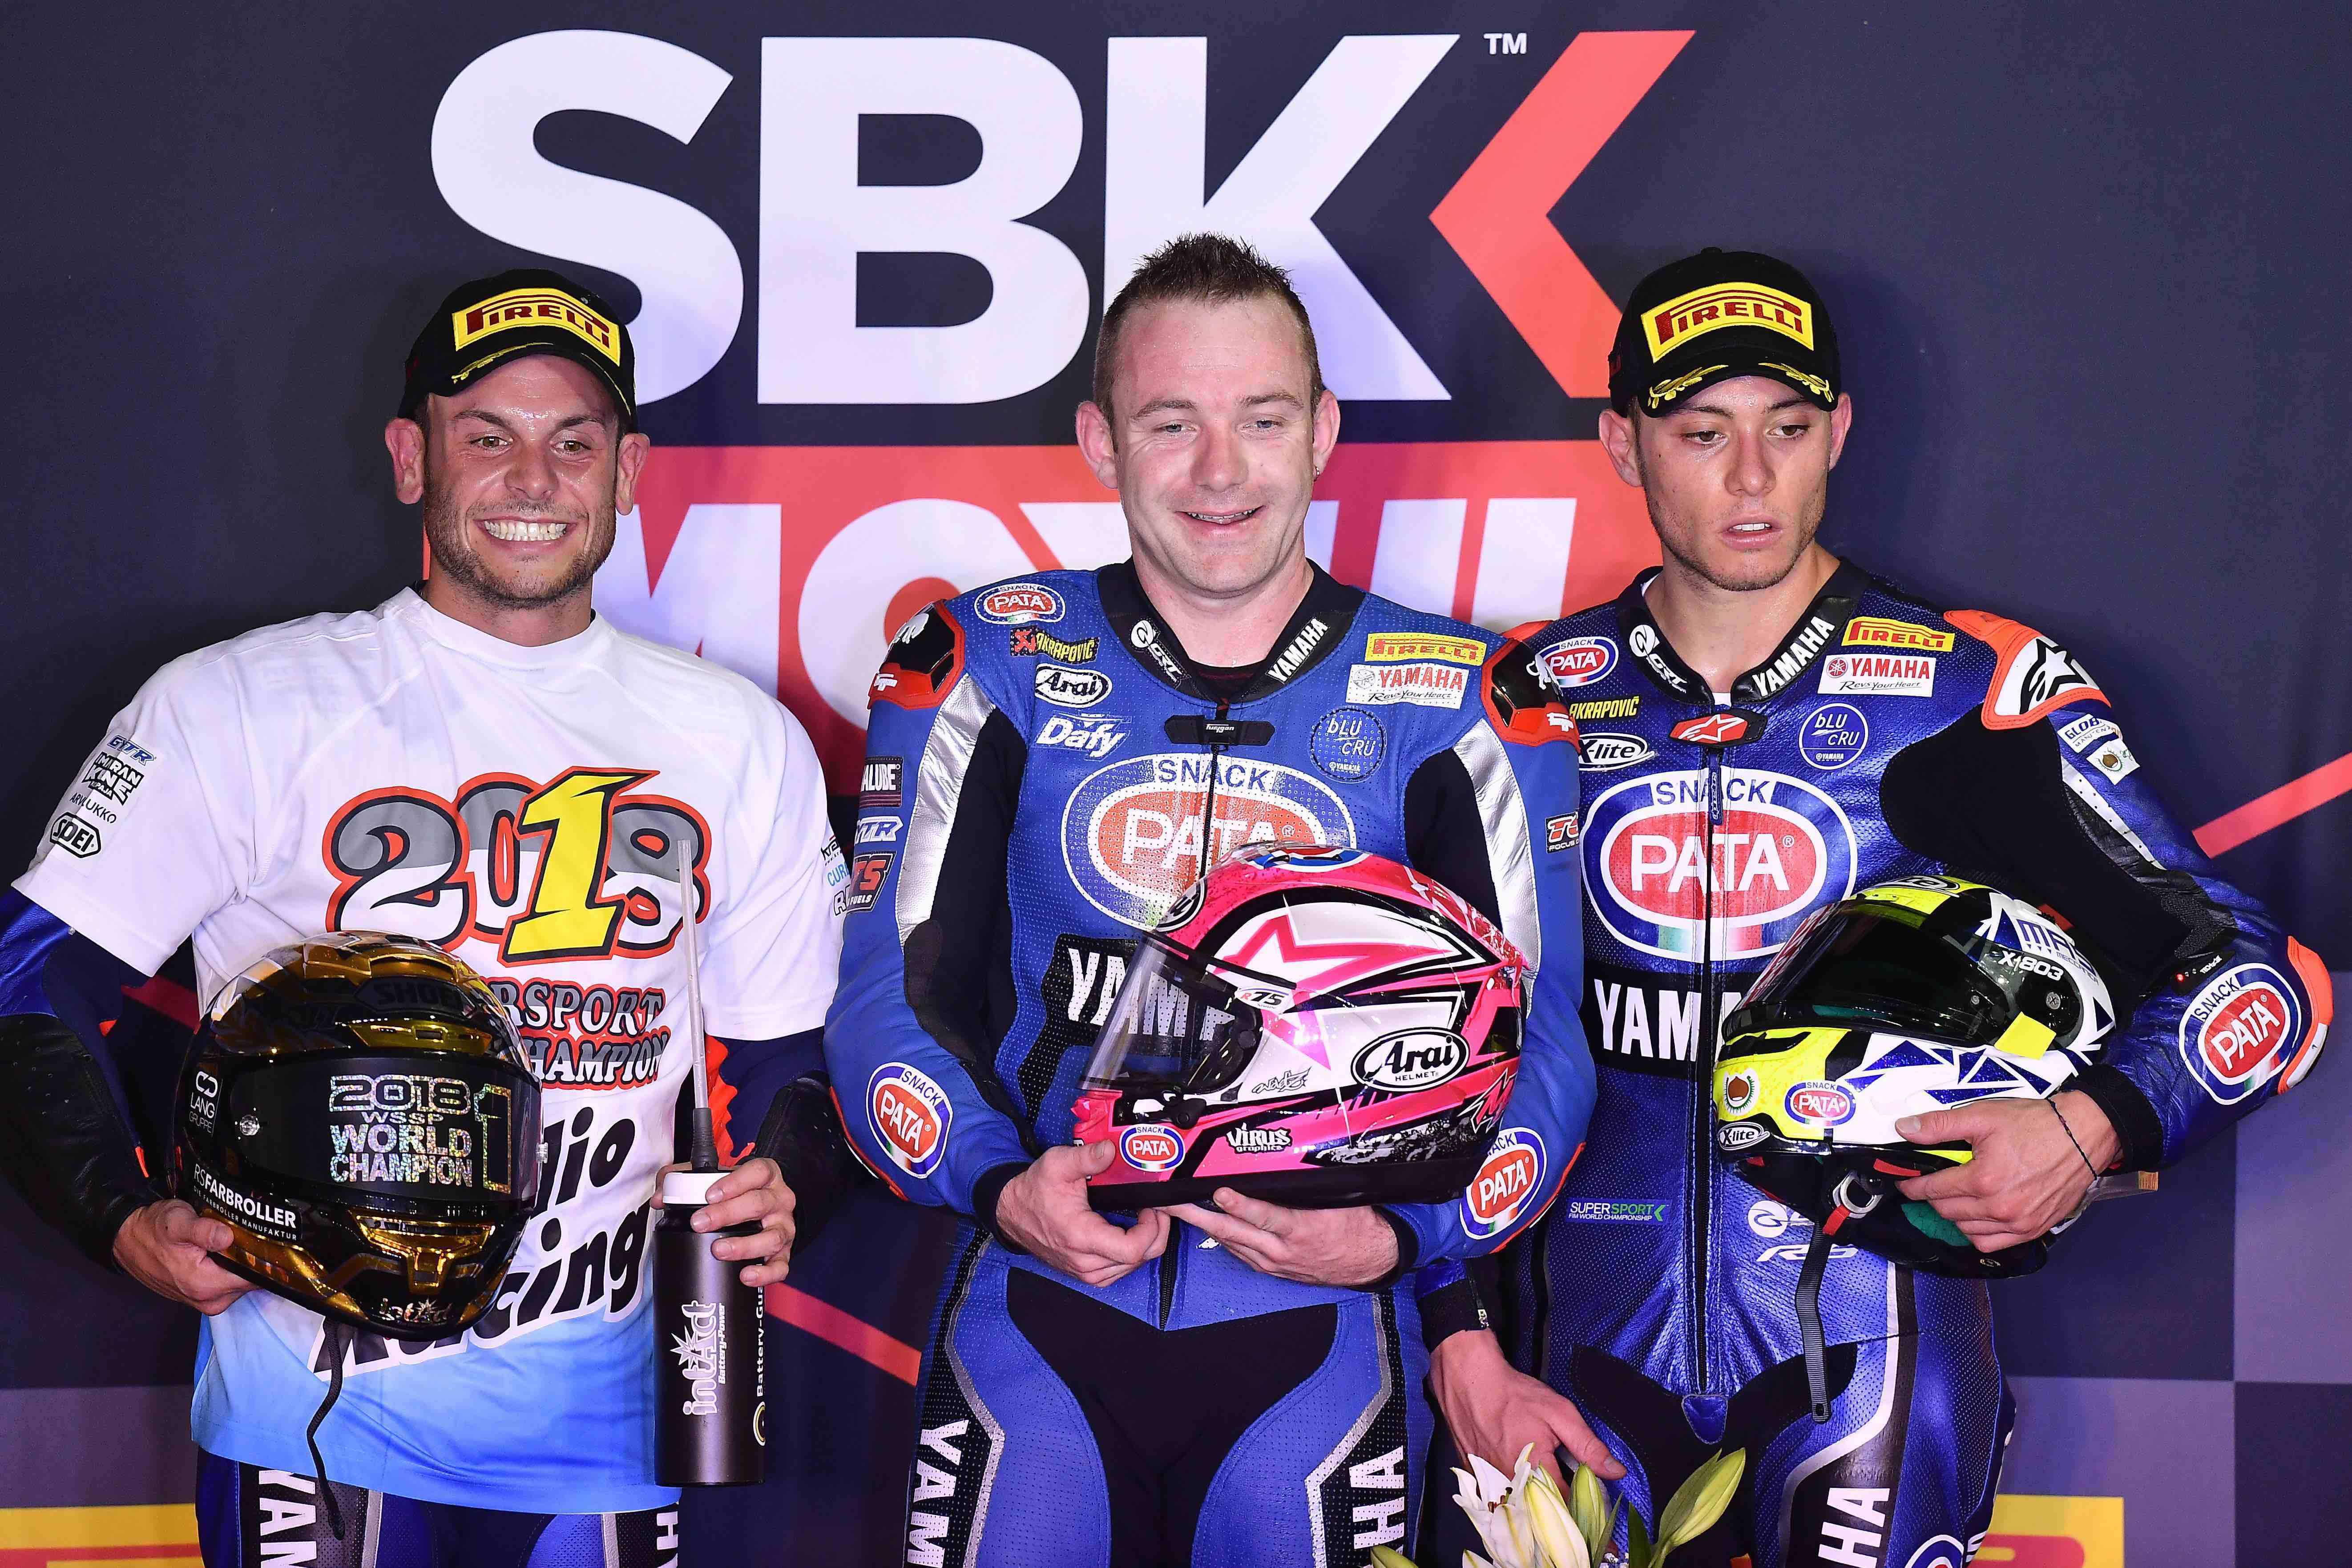 Mahias takes win in extraordinary Lusail race; Cortese becomes WorldSSP Champion